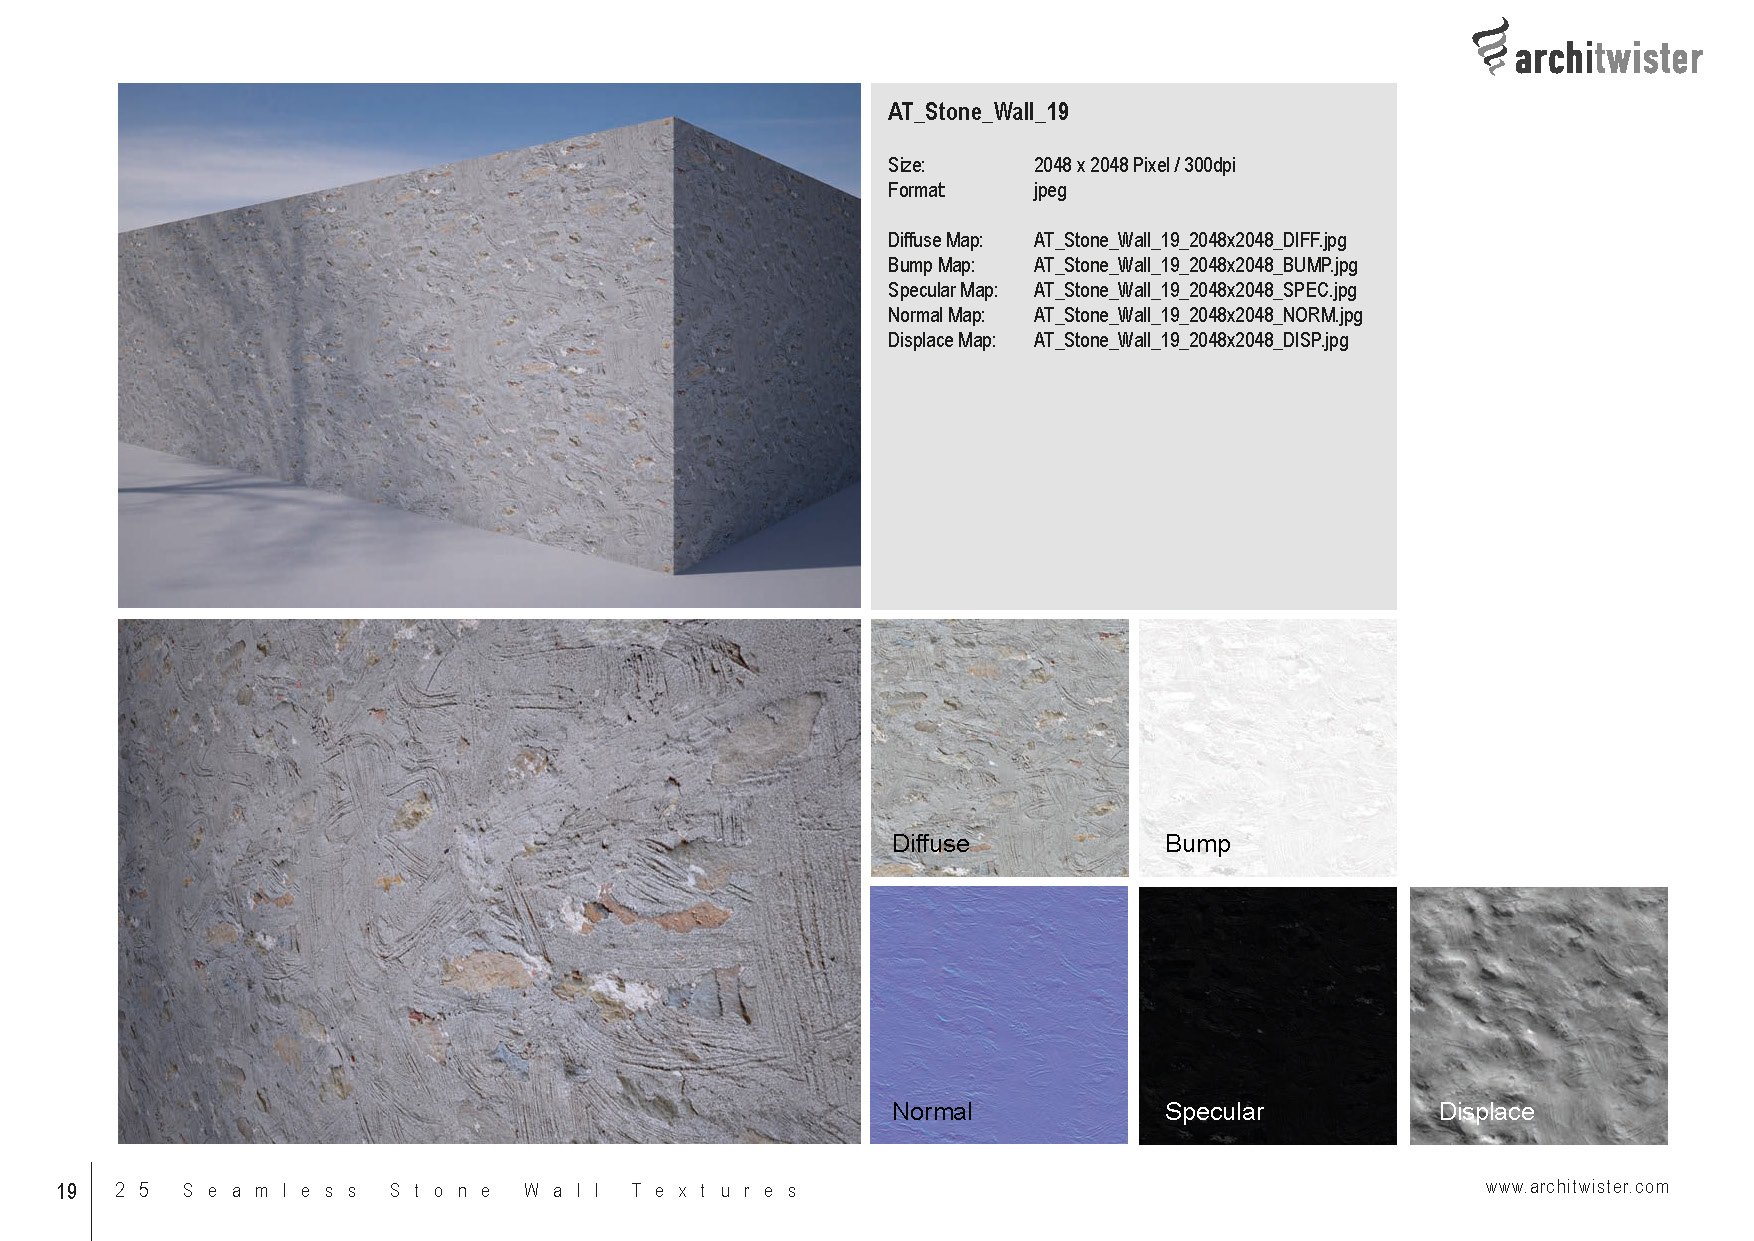 at stone wall textures catalog 01 seite 20 364